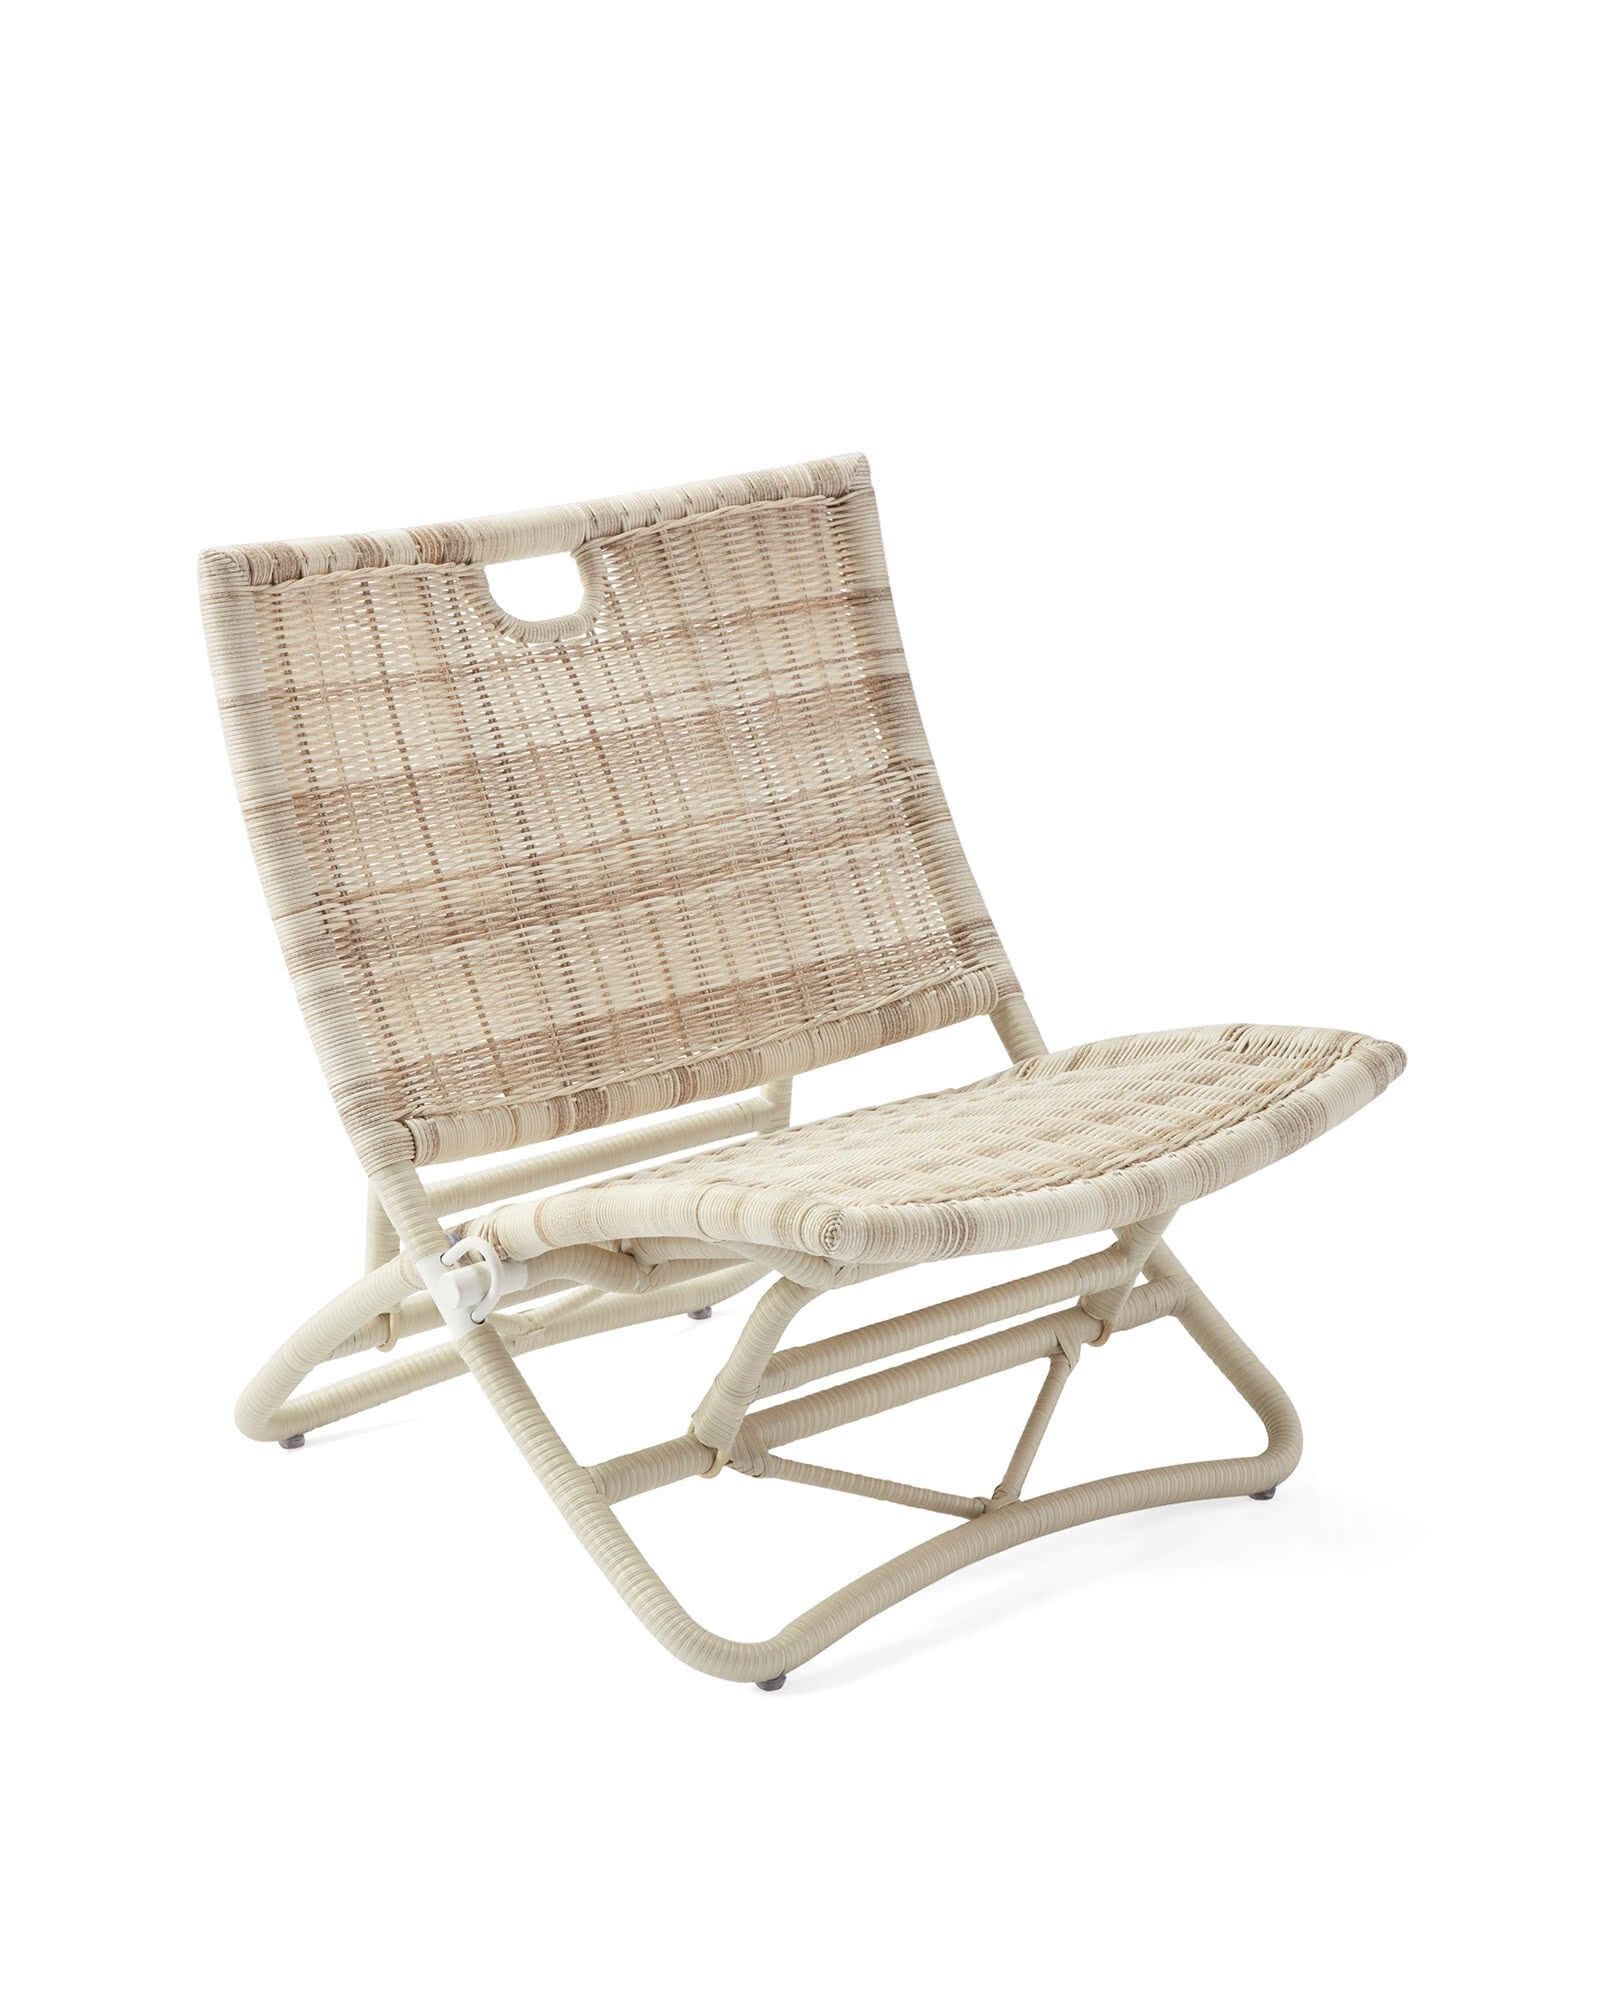 Palisades Outdoor Chair - Driftwood | Serena and Lily